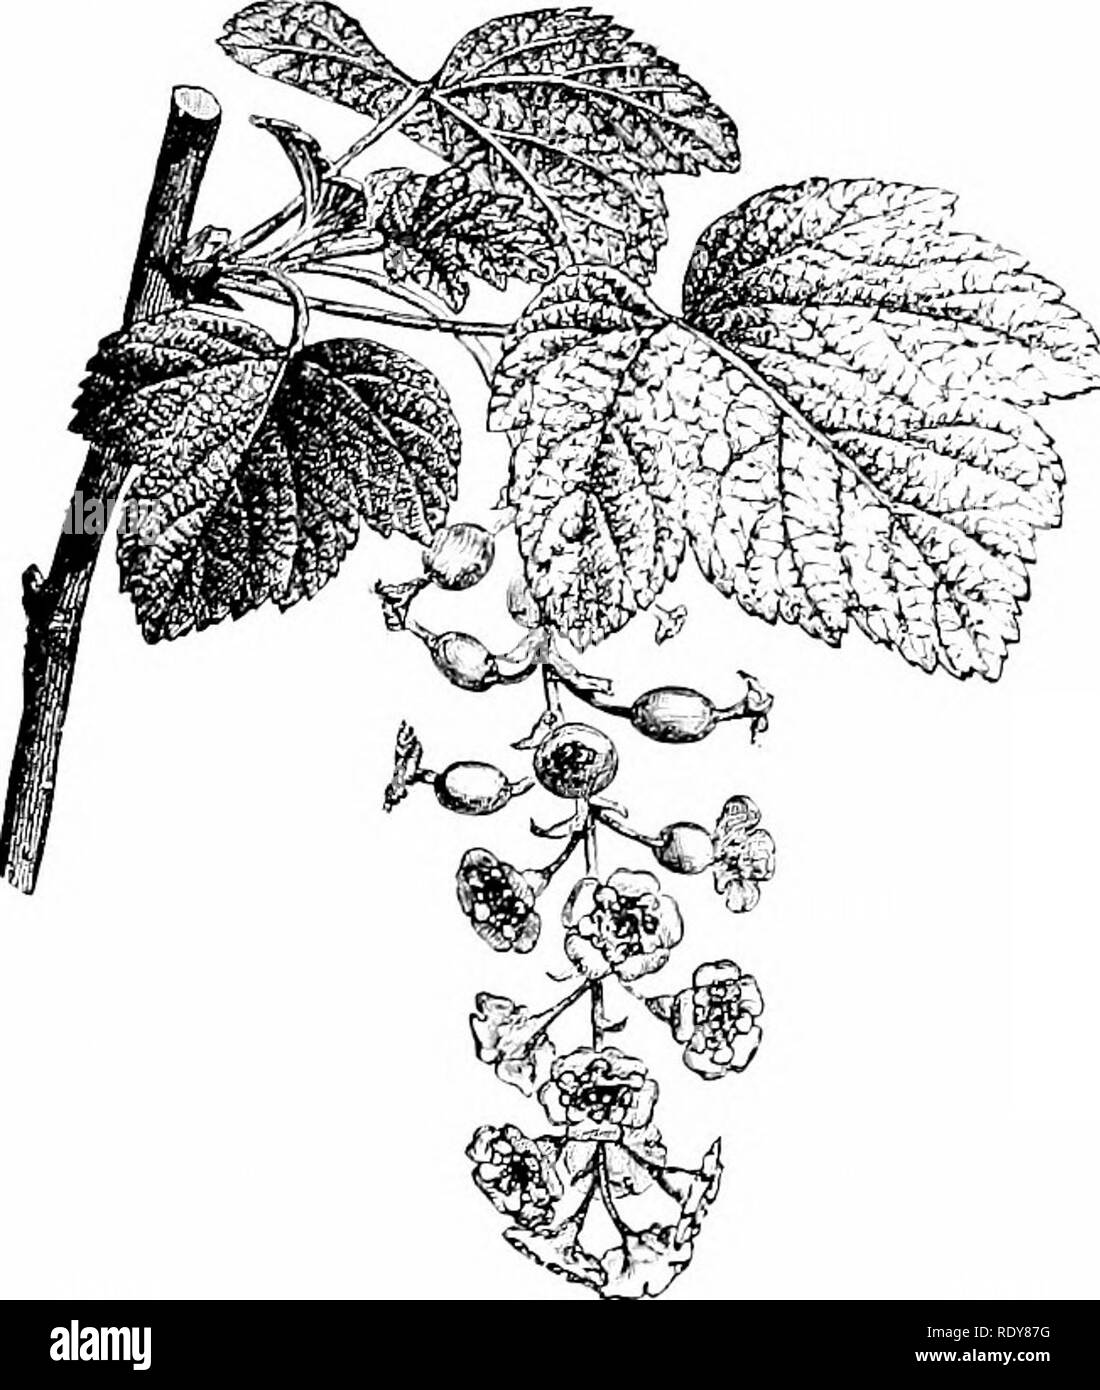 . Botany of the living plant. Botany. 226 BOTANY OF THE LIVING PLANT borne by the main axis or peduncle, as in Verbena (Fig. 172). Or the lateral flower-stalks (pedicels) may be elongated, gi-ving the condition of the typical Raceme, as in the Currant (Fig. 173). Or again the pedicels may be themselves branched, as in the Vine, giving the panicle (Fig. 174). Such differences depend partly upon differences of intercalary growth, partly upon branching of a higher order. In all of them the distal buds develop latest. It happens, however, not uncommonly that the characters may be mixed. For instan Stock Photo